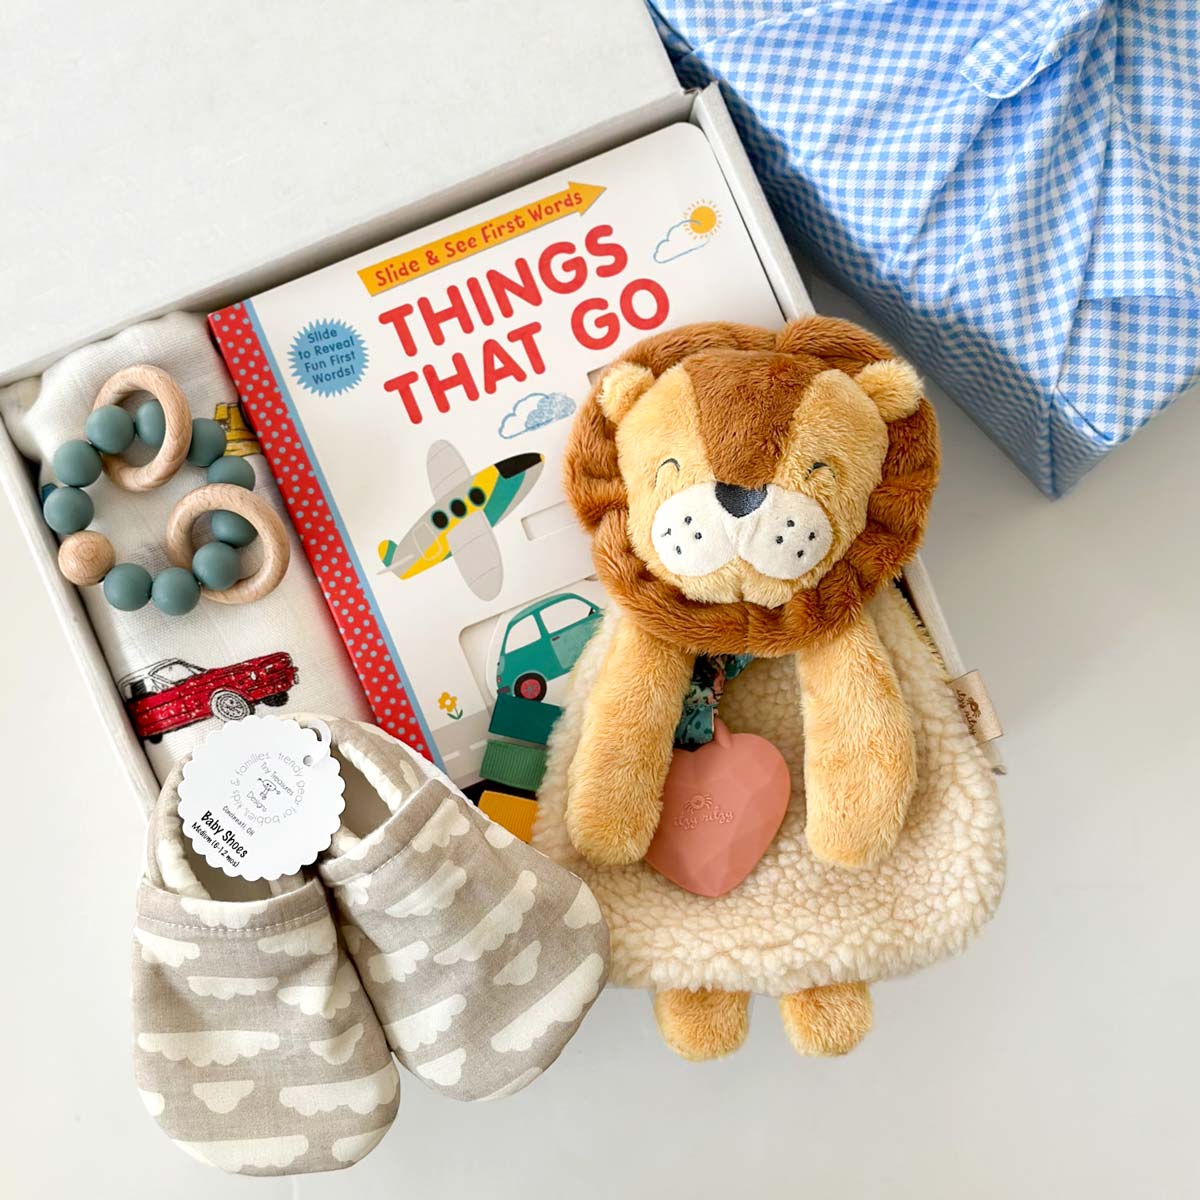 kadoo baby boy gifts things that go, include board book, lion plush, baby shoes, swaddle, teether &amp; more.